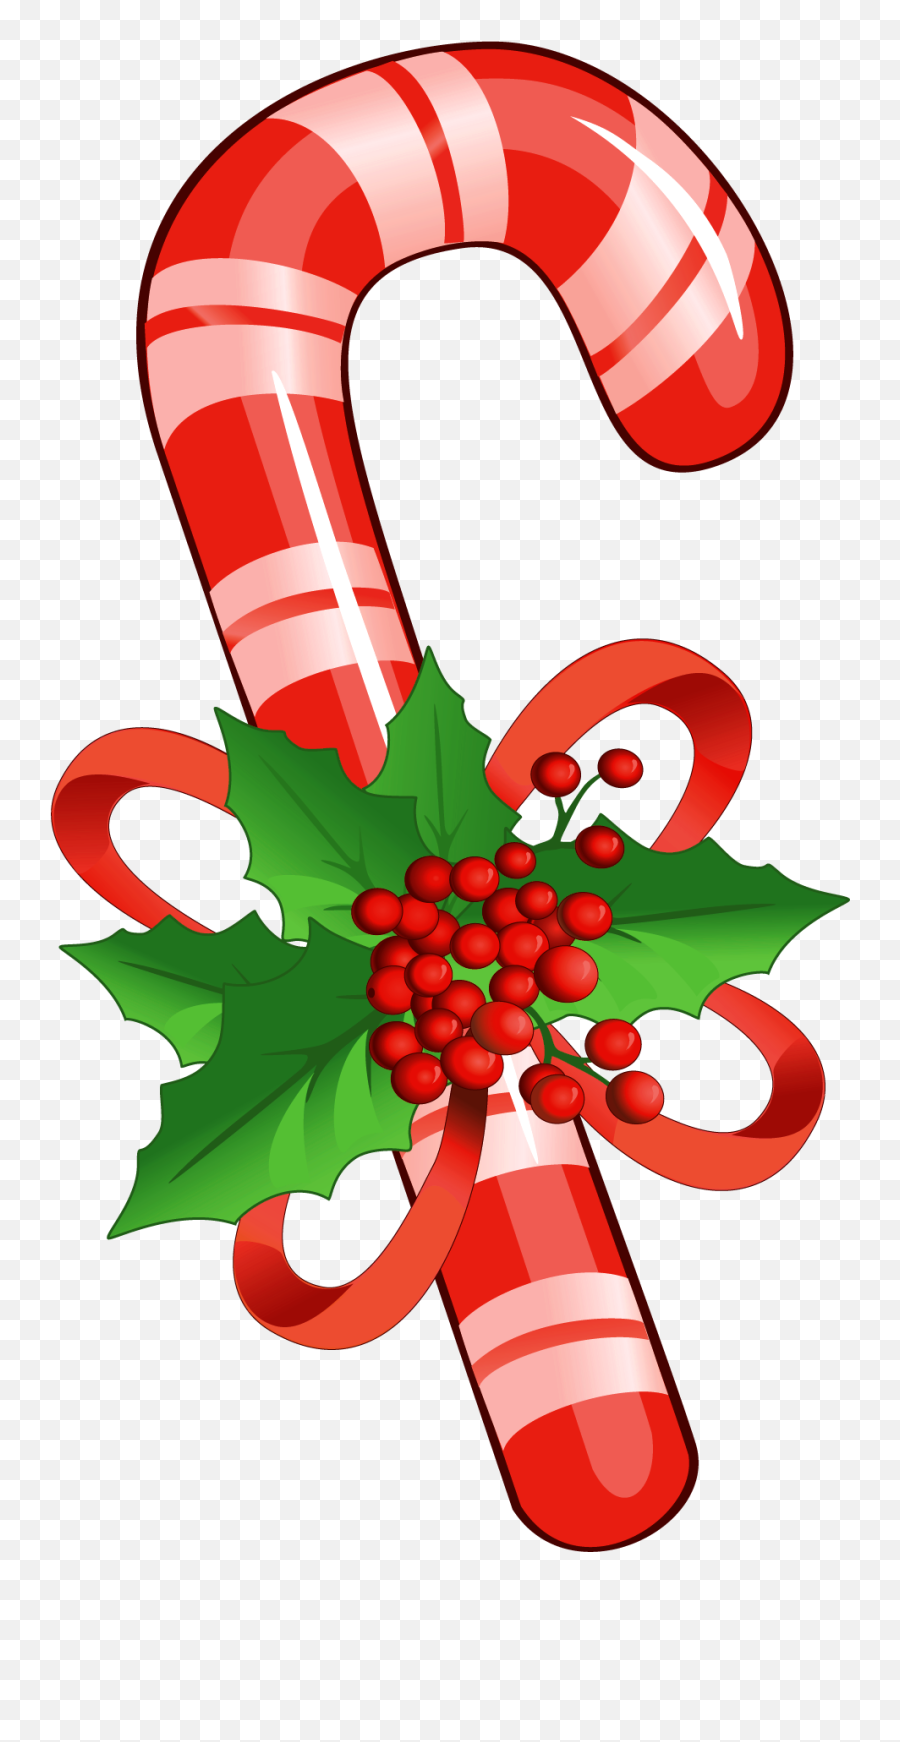 Candy Cane Clipart - Clipartix Candies For Christmas Clipart Emoji,Emoji Candies